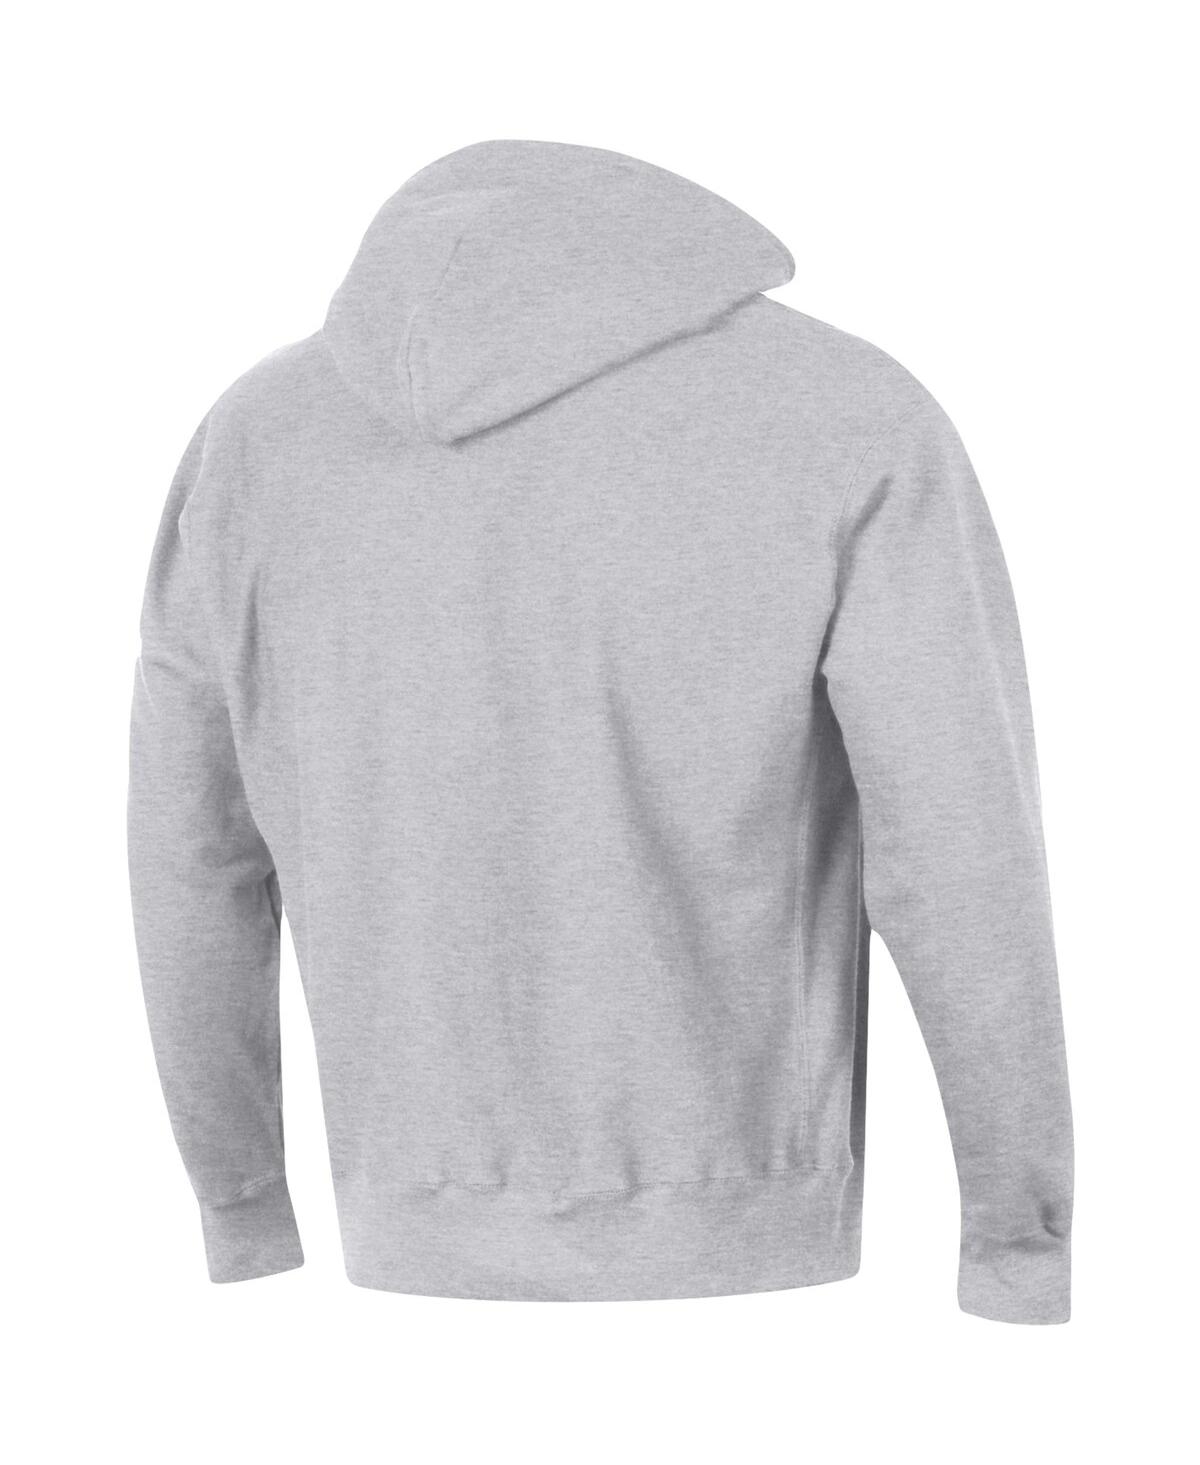 Shop Champion Men's  Heathered Gray Ohio State Buckeyes Team Arch Reverse Weave Pullover Hoodie